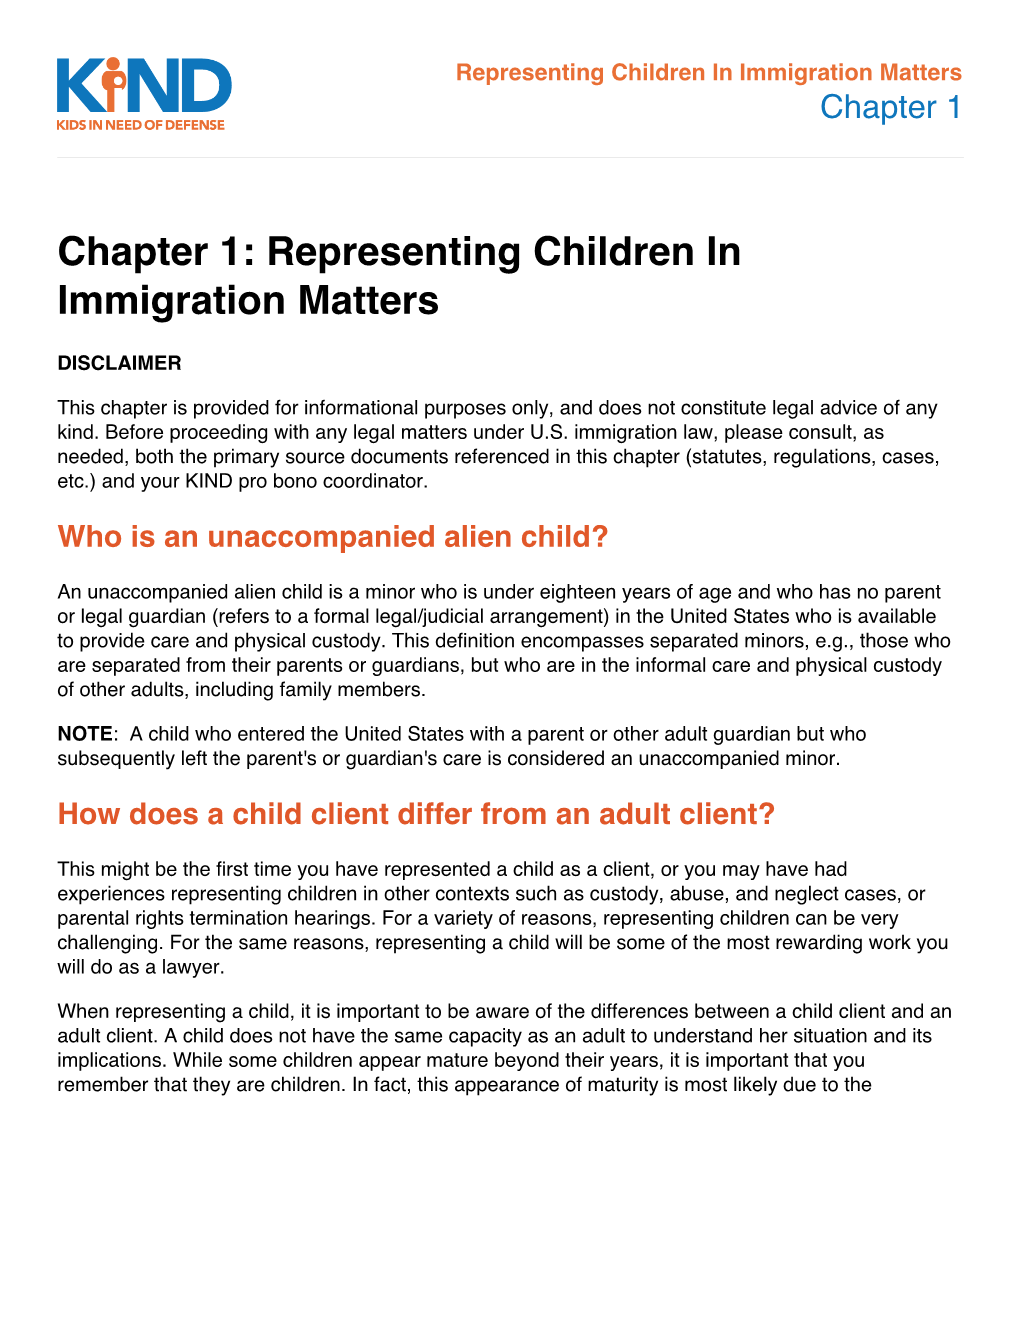 Representing Children in Immigration Matters Chapter 1